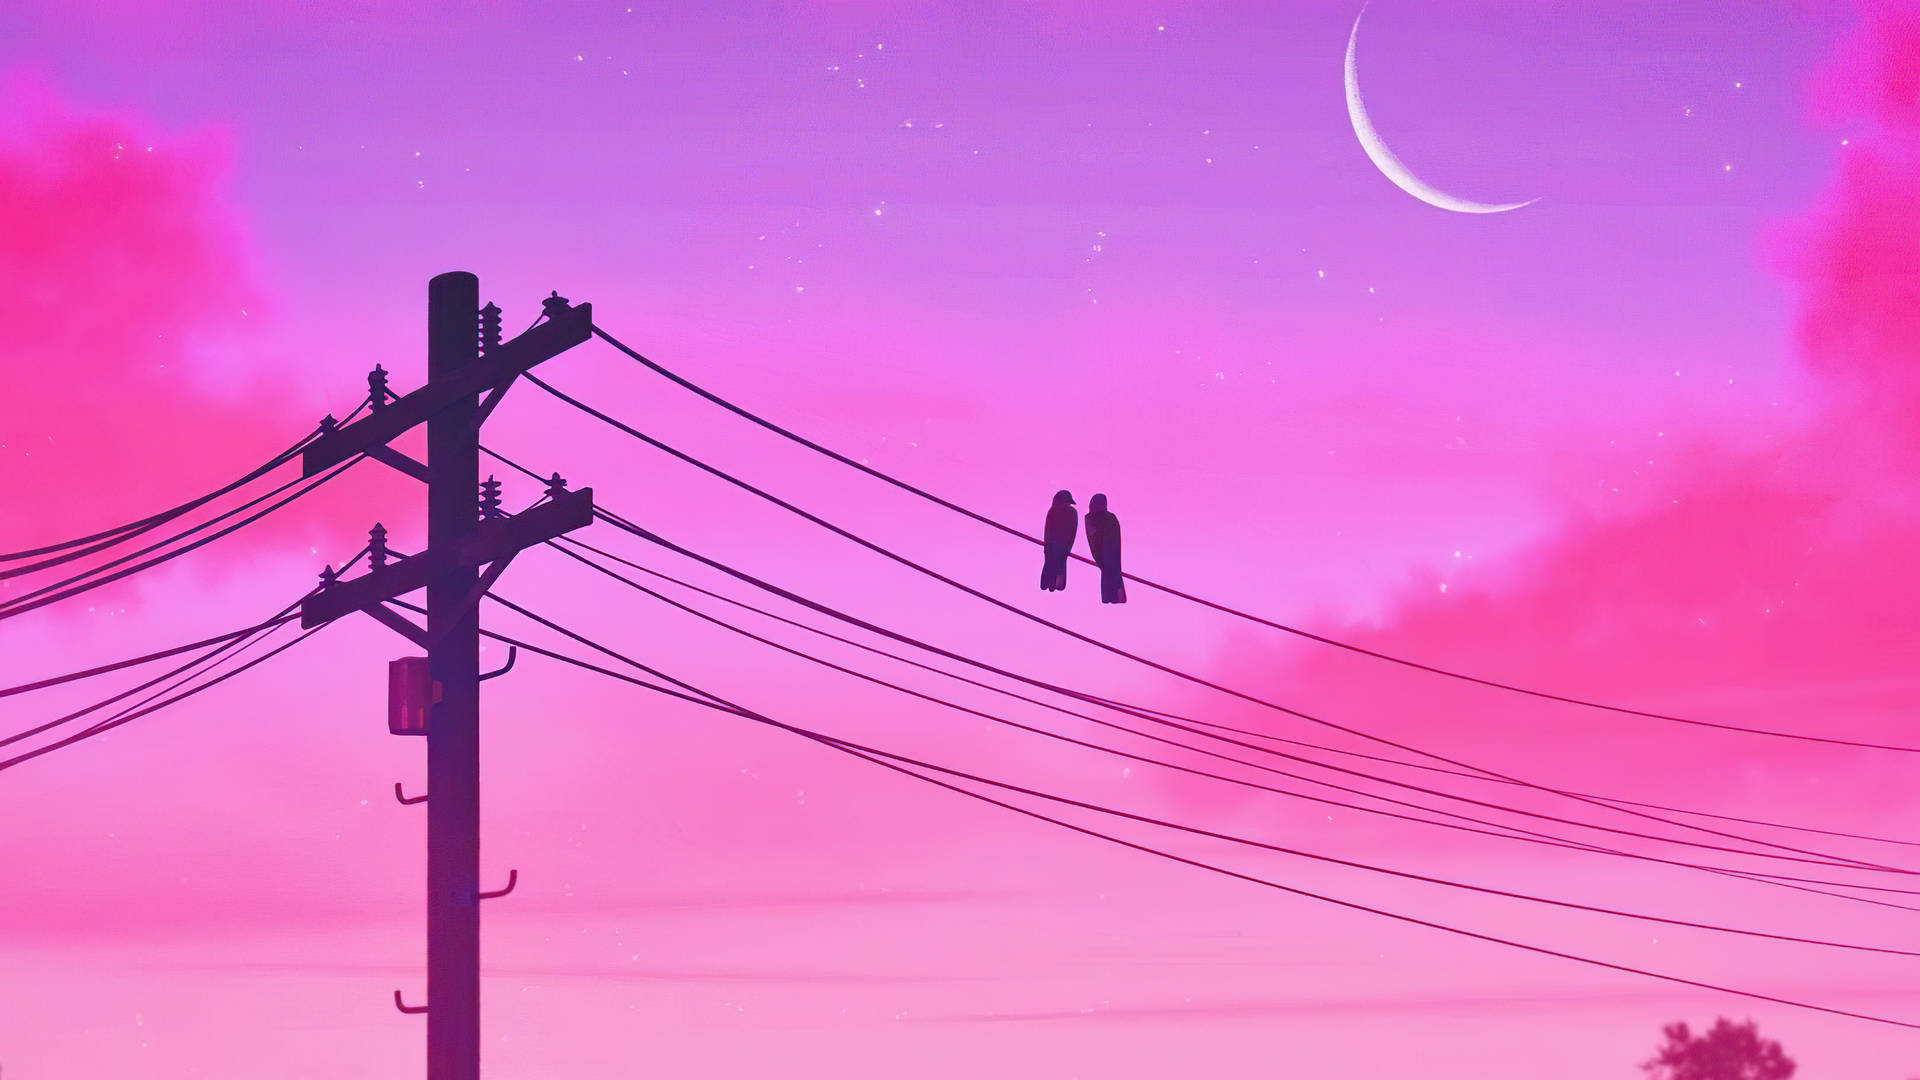 Crescent Aesthetic Moon And Love Birds